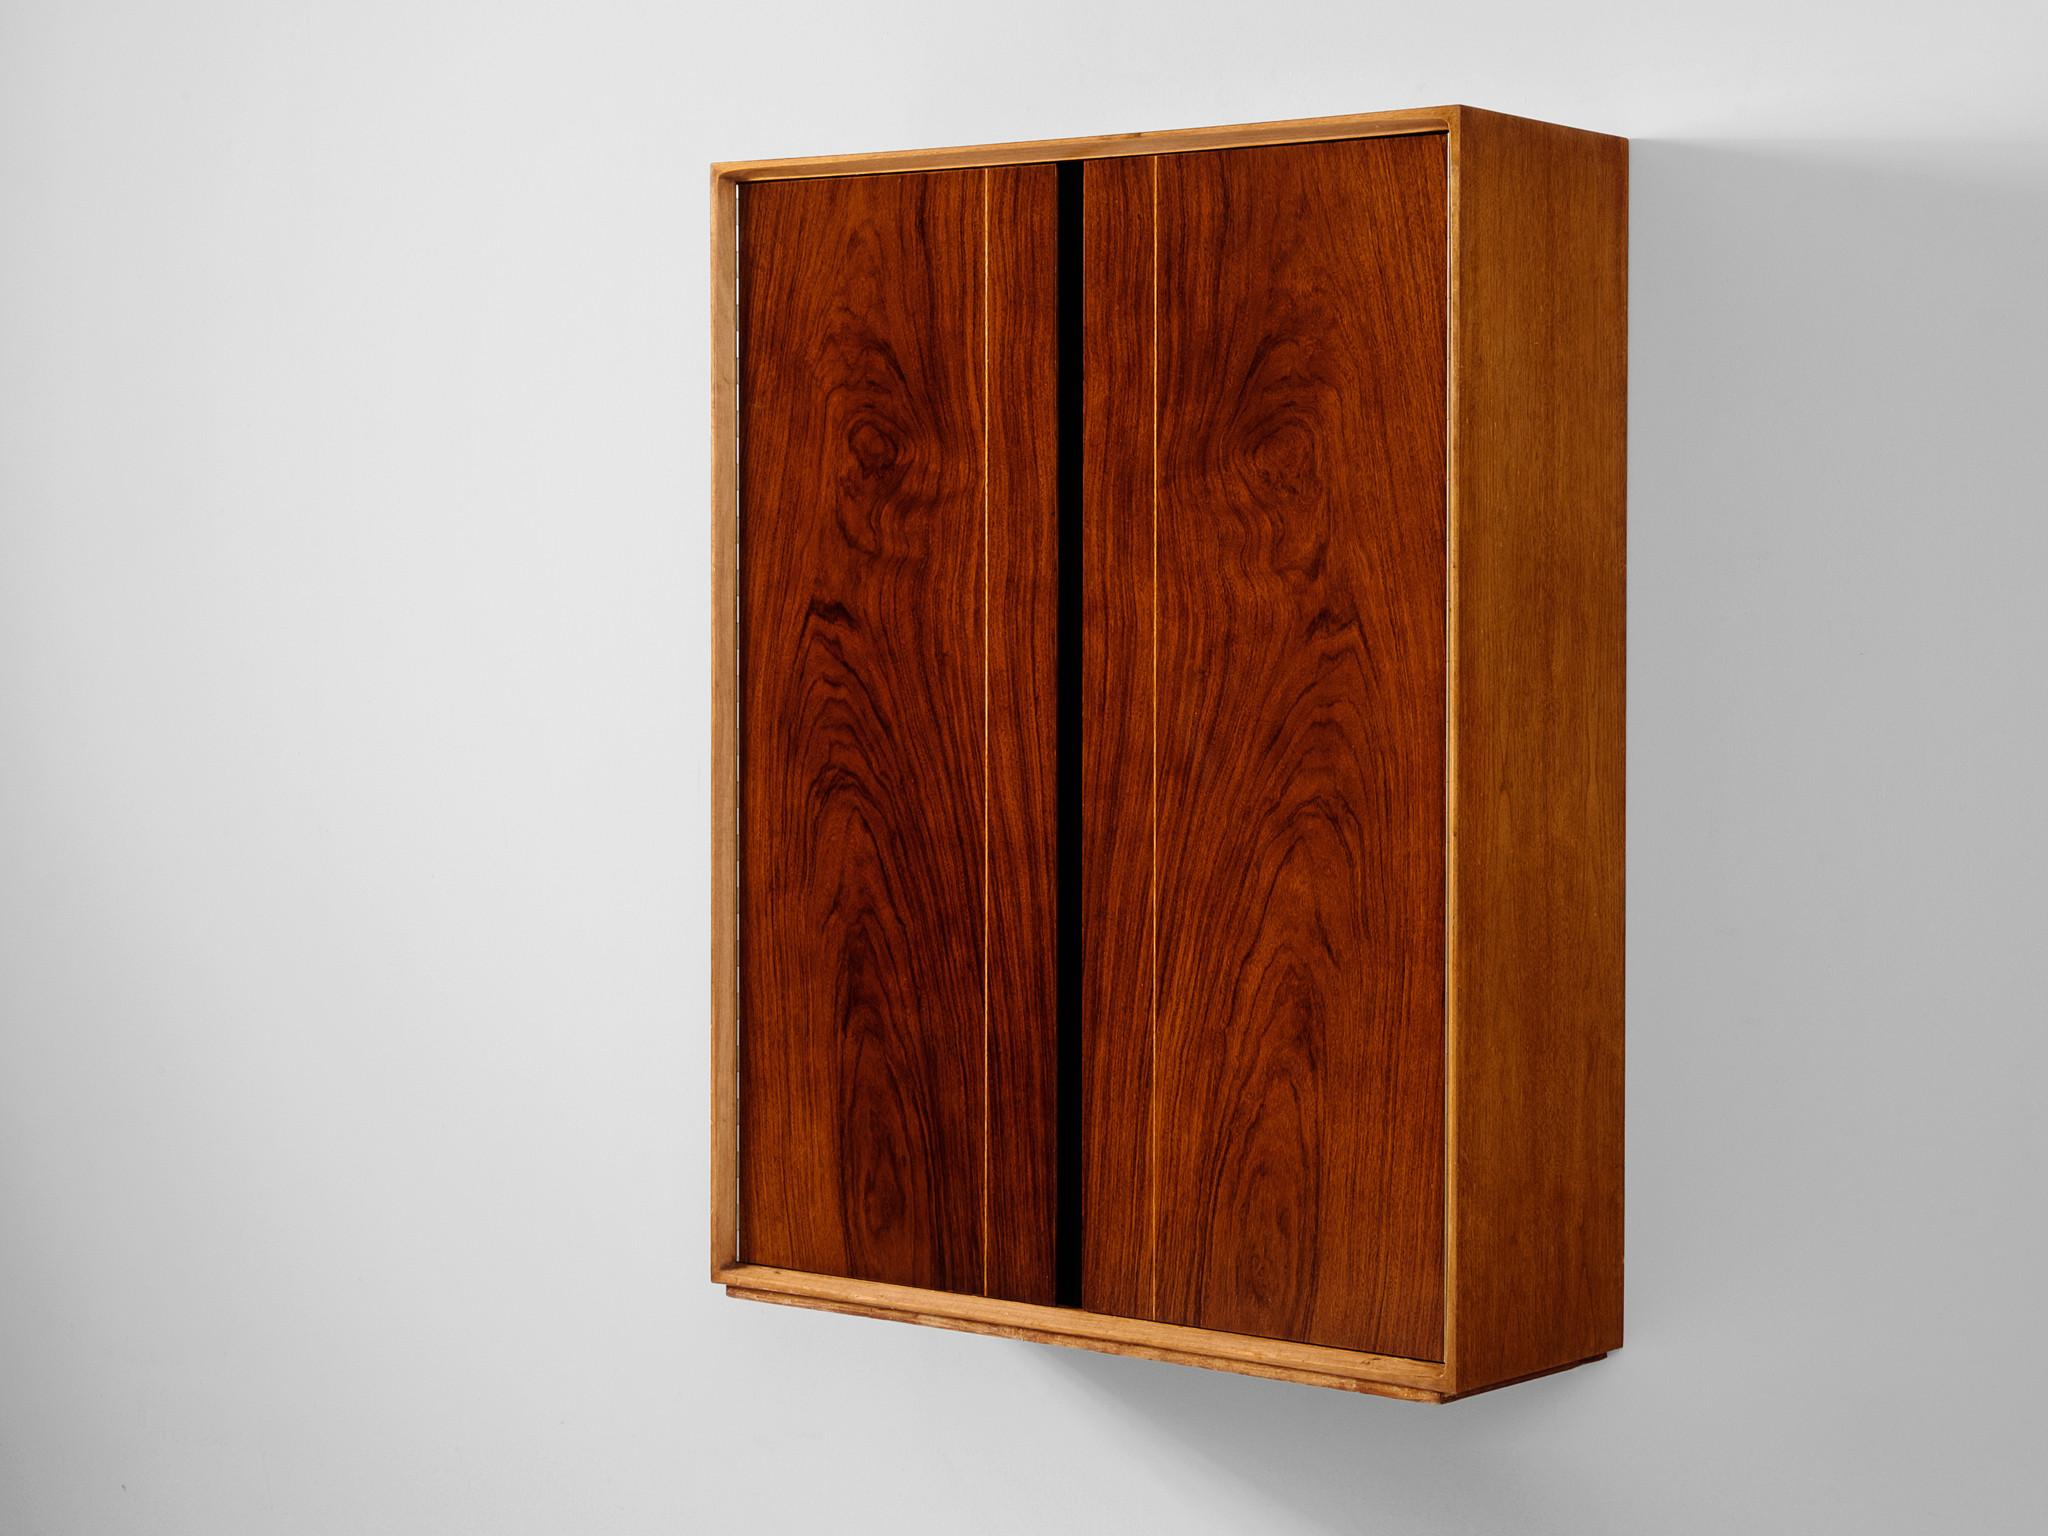 De Coene Frères, wall-mounted bar cabinet model 'Madison', walnut, Belgium, 1958.

Floating wall-mounted dry bar in walnut by de Belgian manufacturer De Coene. The quality of pieces from these manufacturers are absolutely stunning and hold great